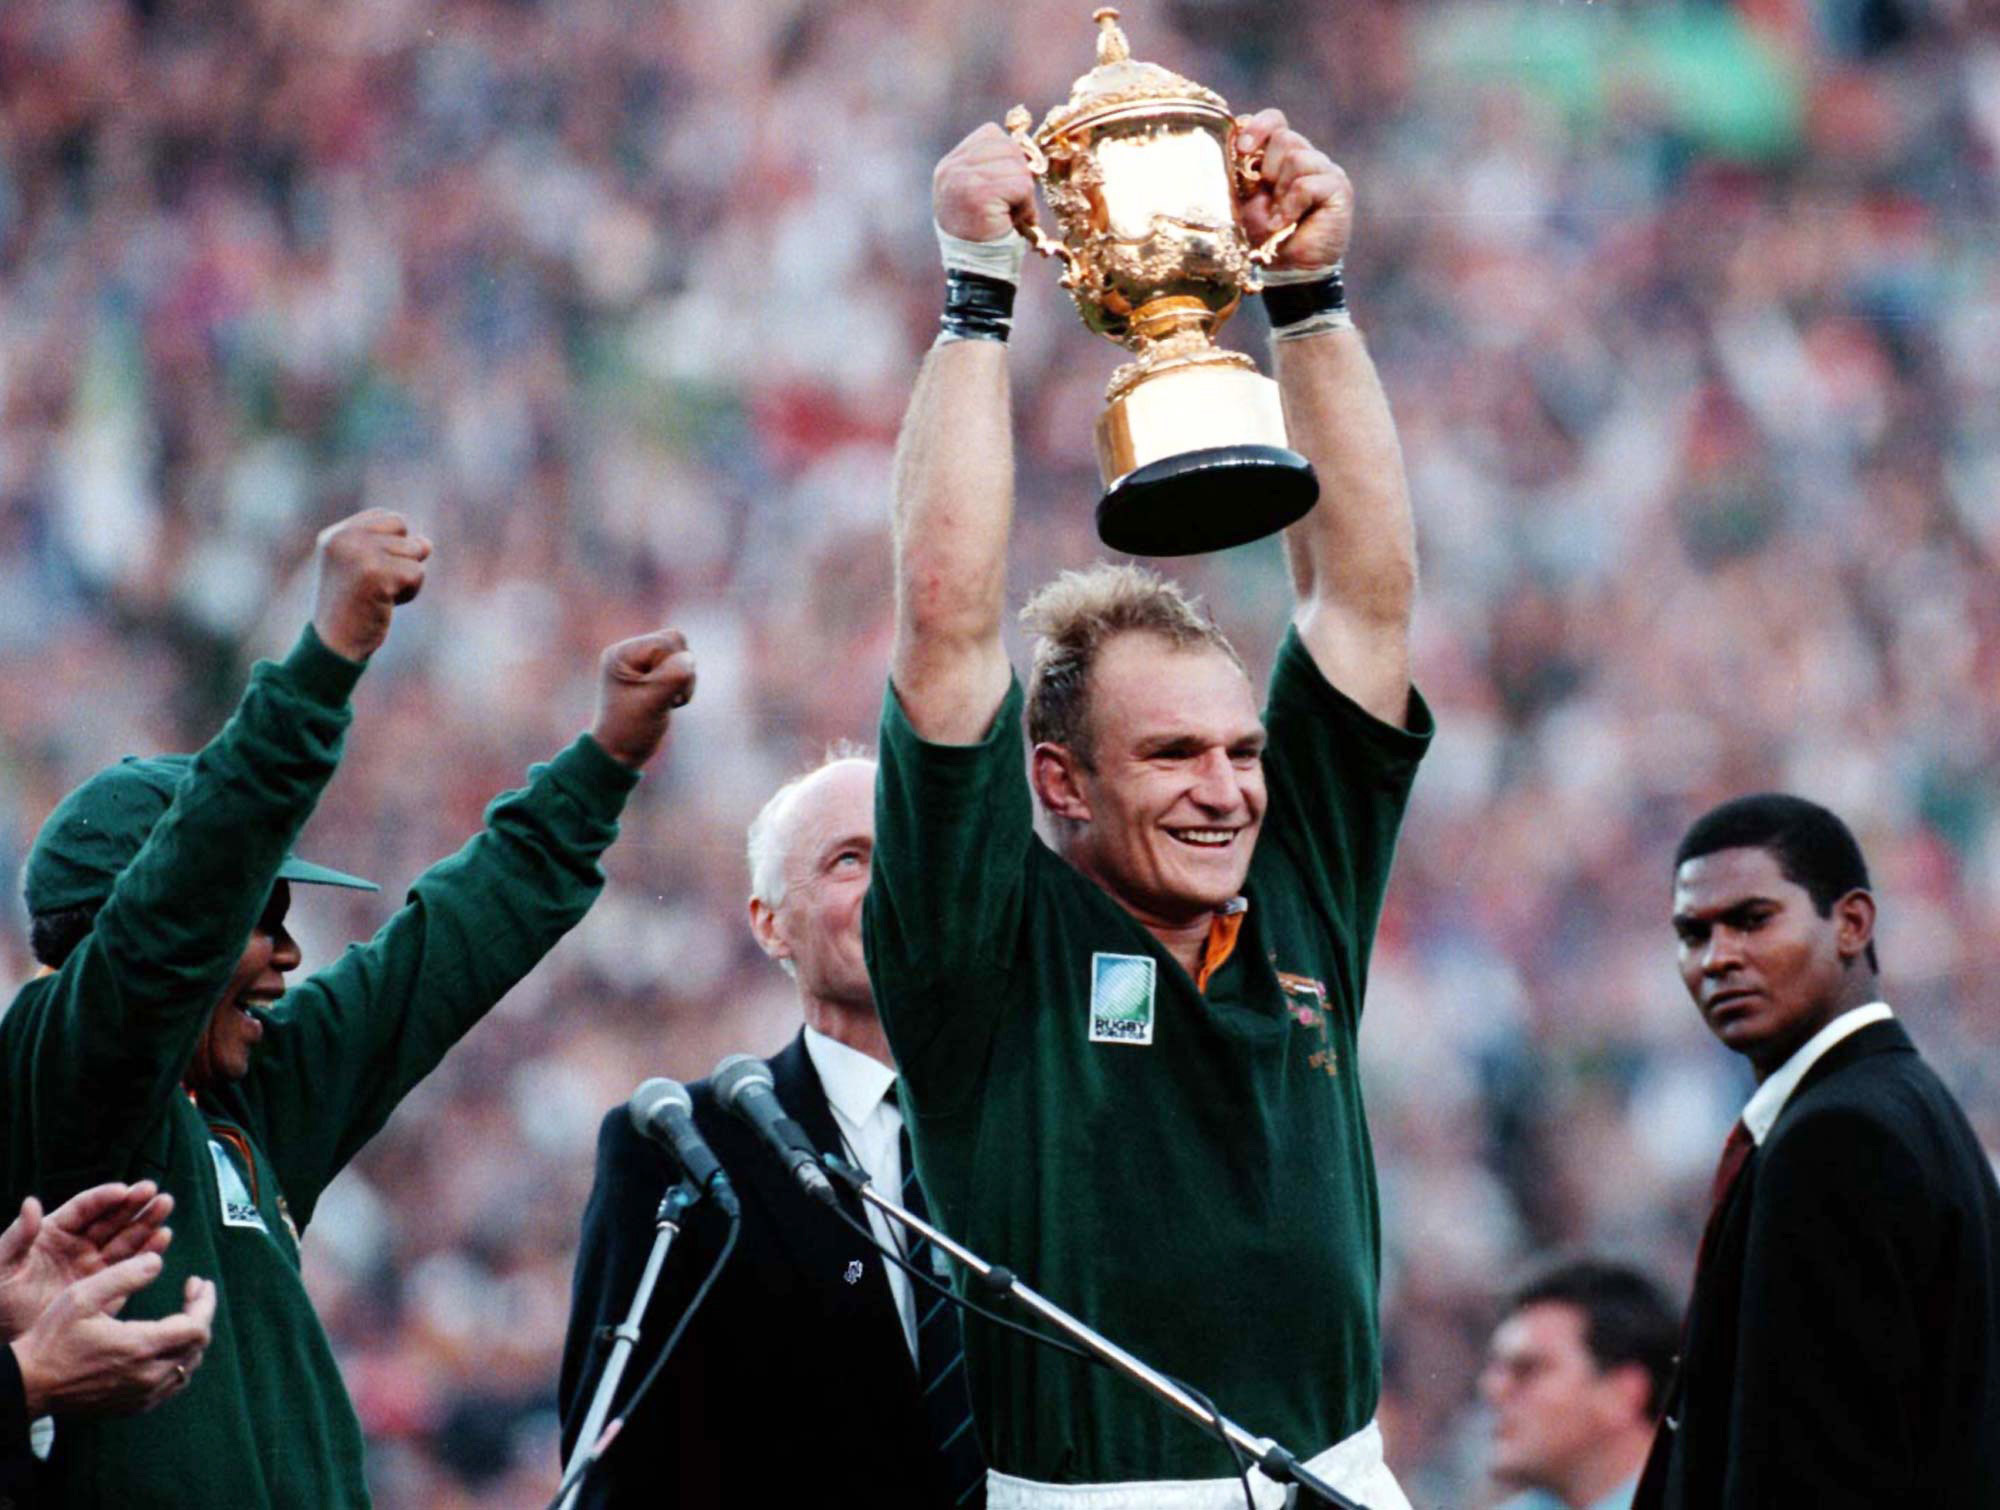 South Arican President Nelson Mandela, left, cheers as Springbok Rugby captain Francois Pienaar holds the trophy high after winning the World Cup Rugby Championship in Johannesburg on June 24 1995.